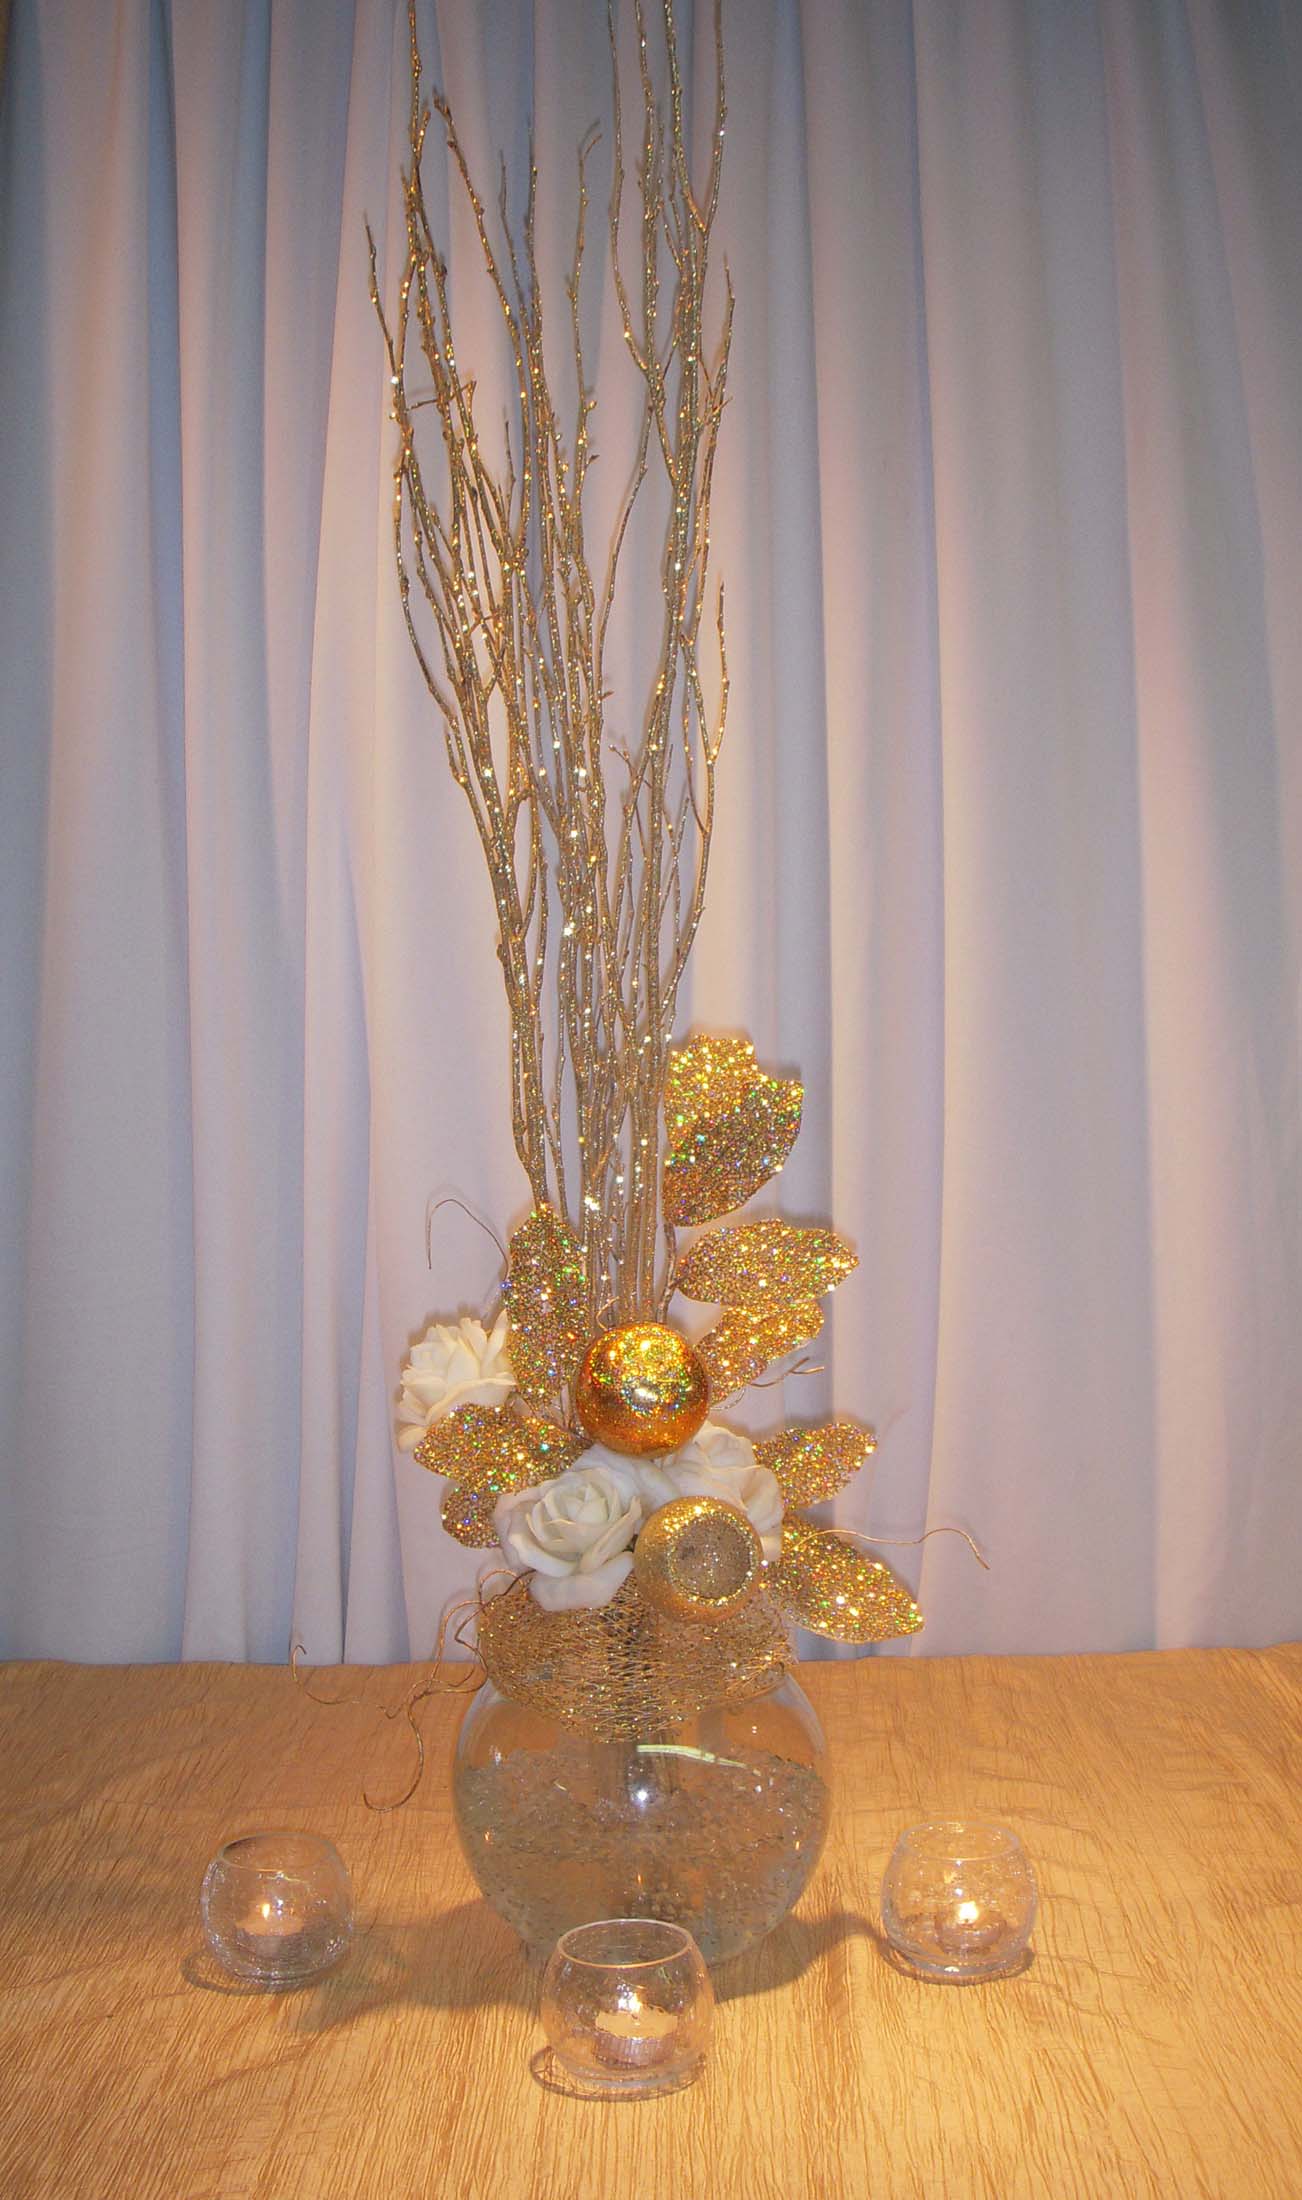 Index of /static/seed/Website Photos/Themed Decor/Winter Holiday/Holiday  Ball/